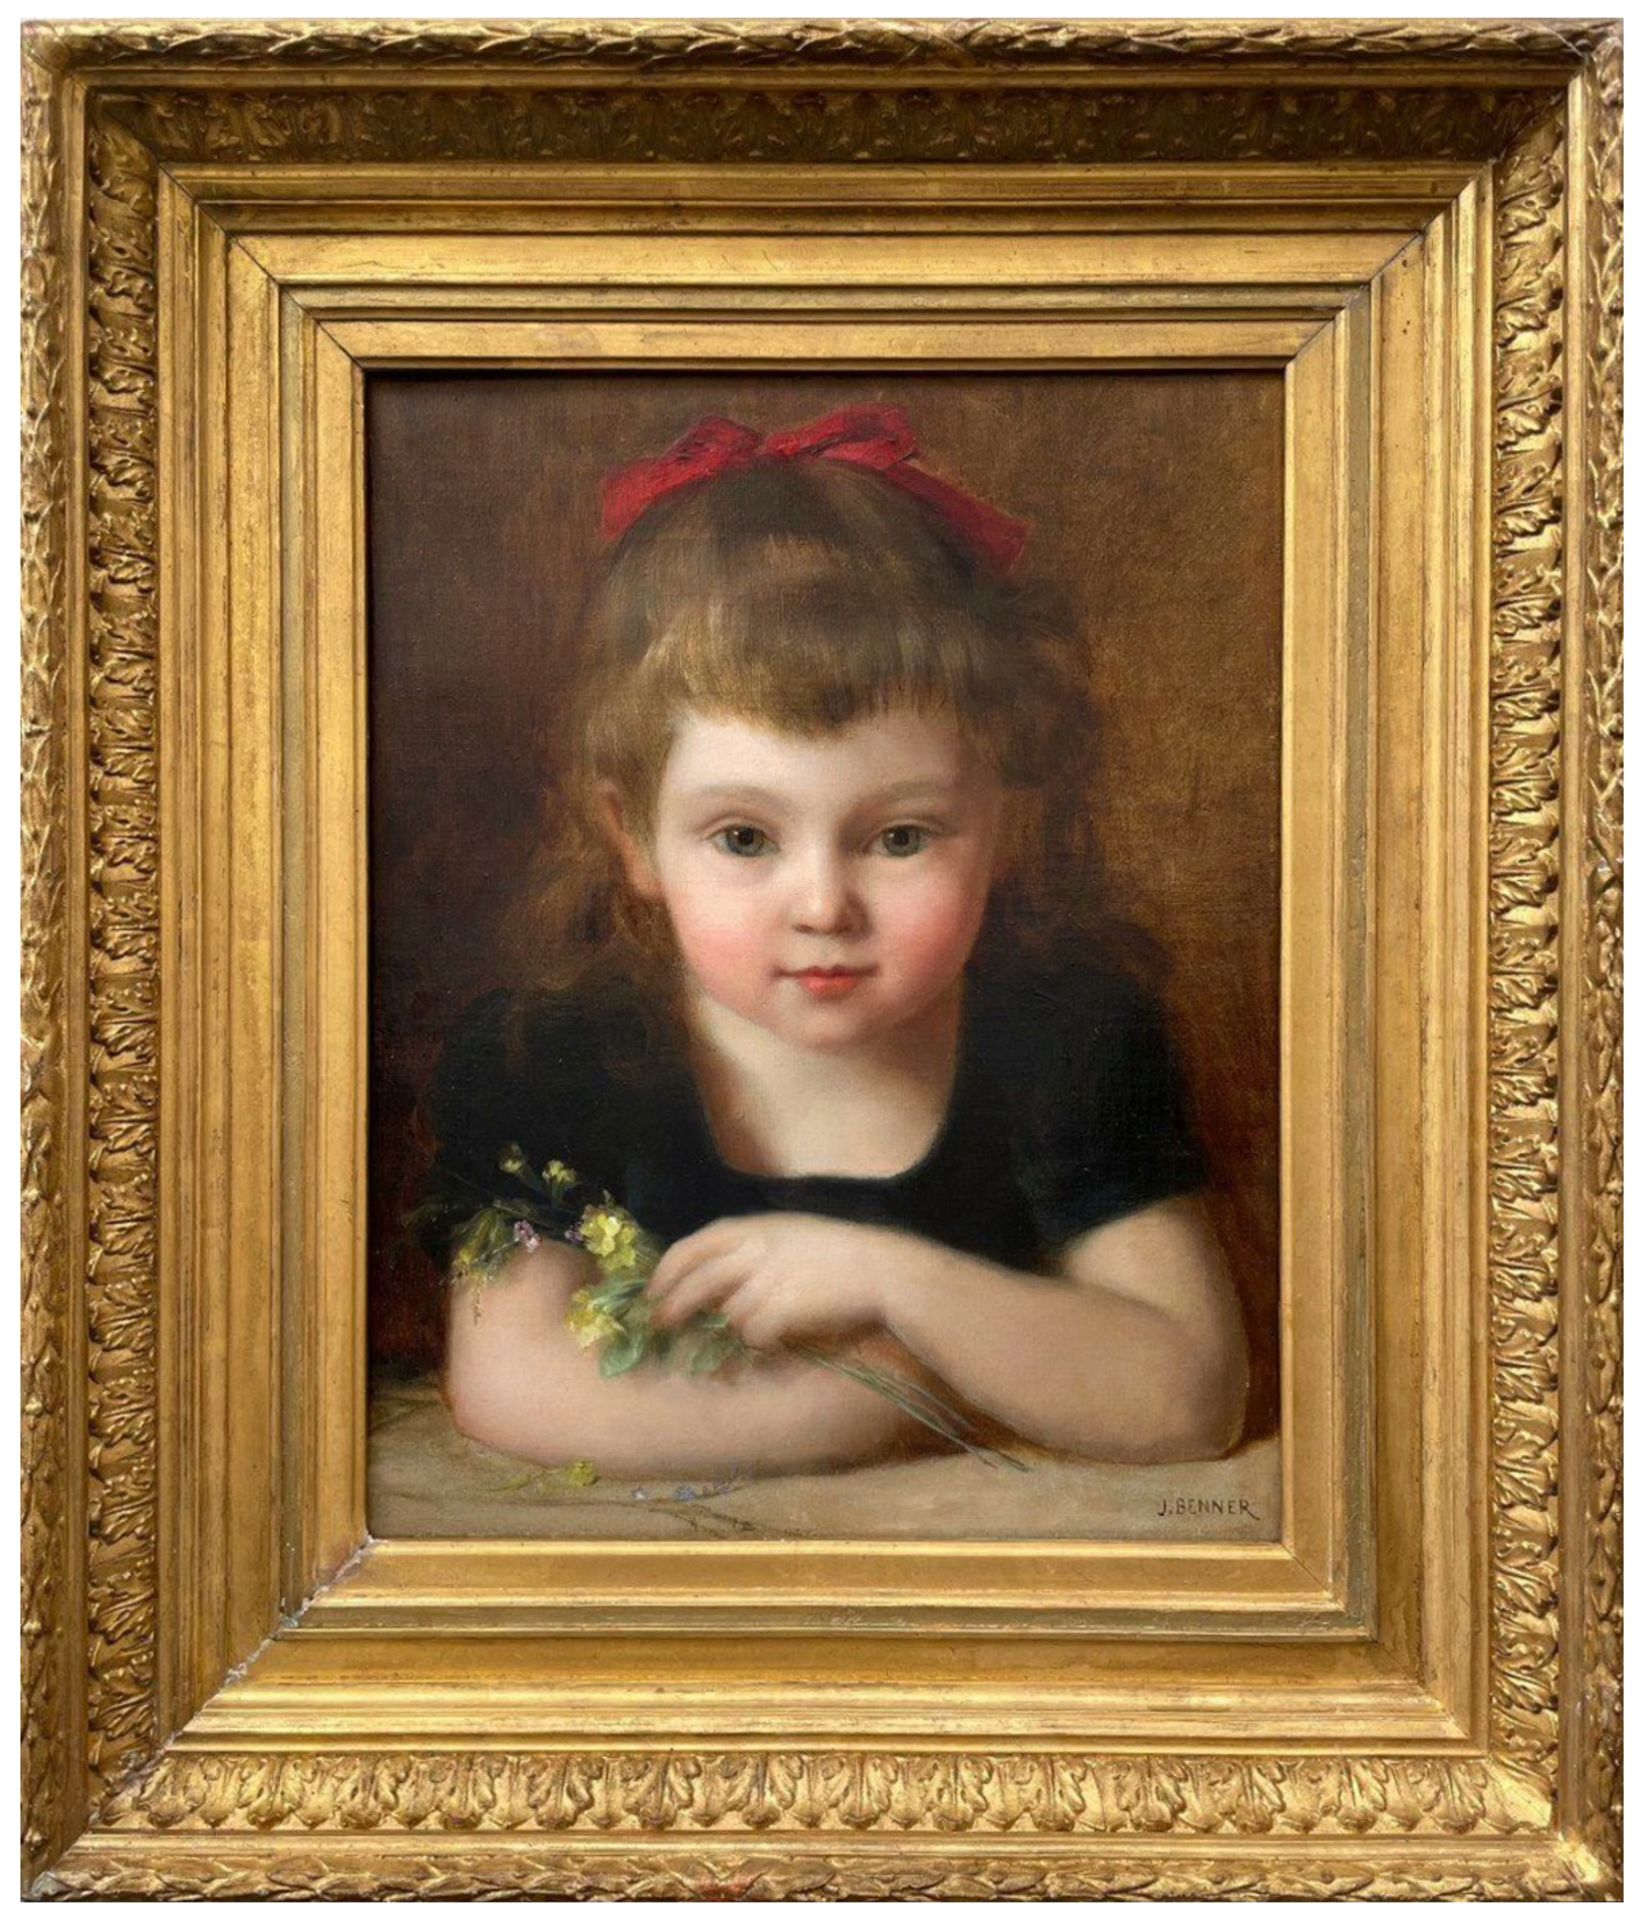 Jean Benner (1836-1909), Oil Painting on Canvas